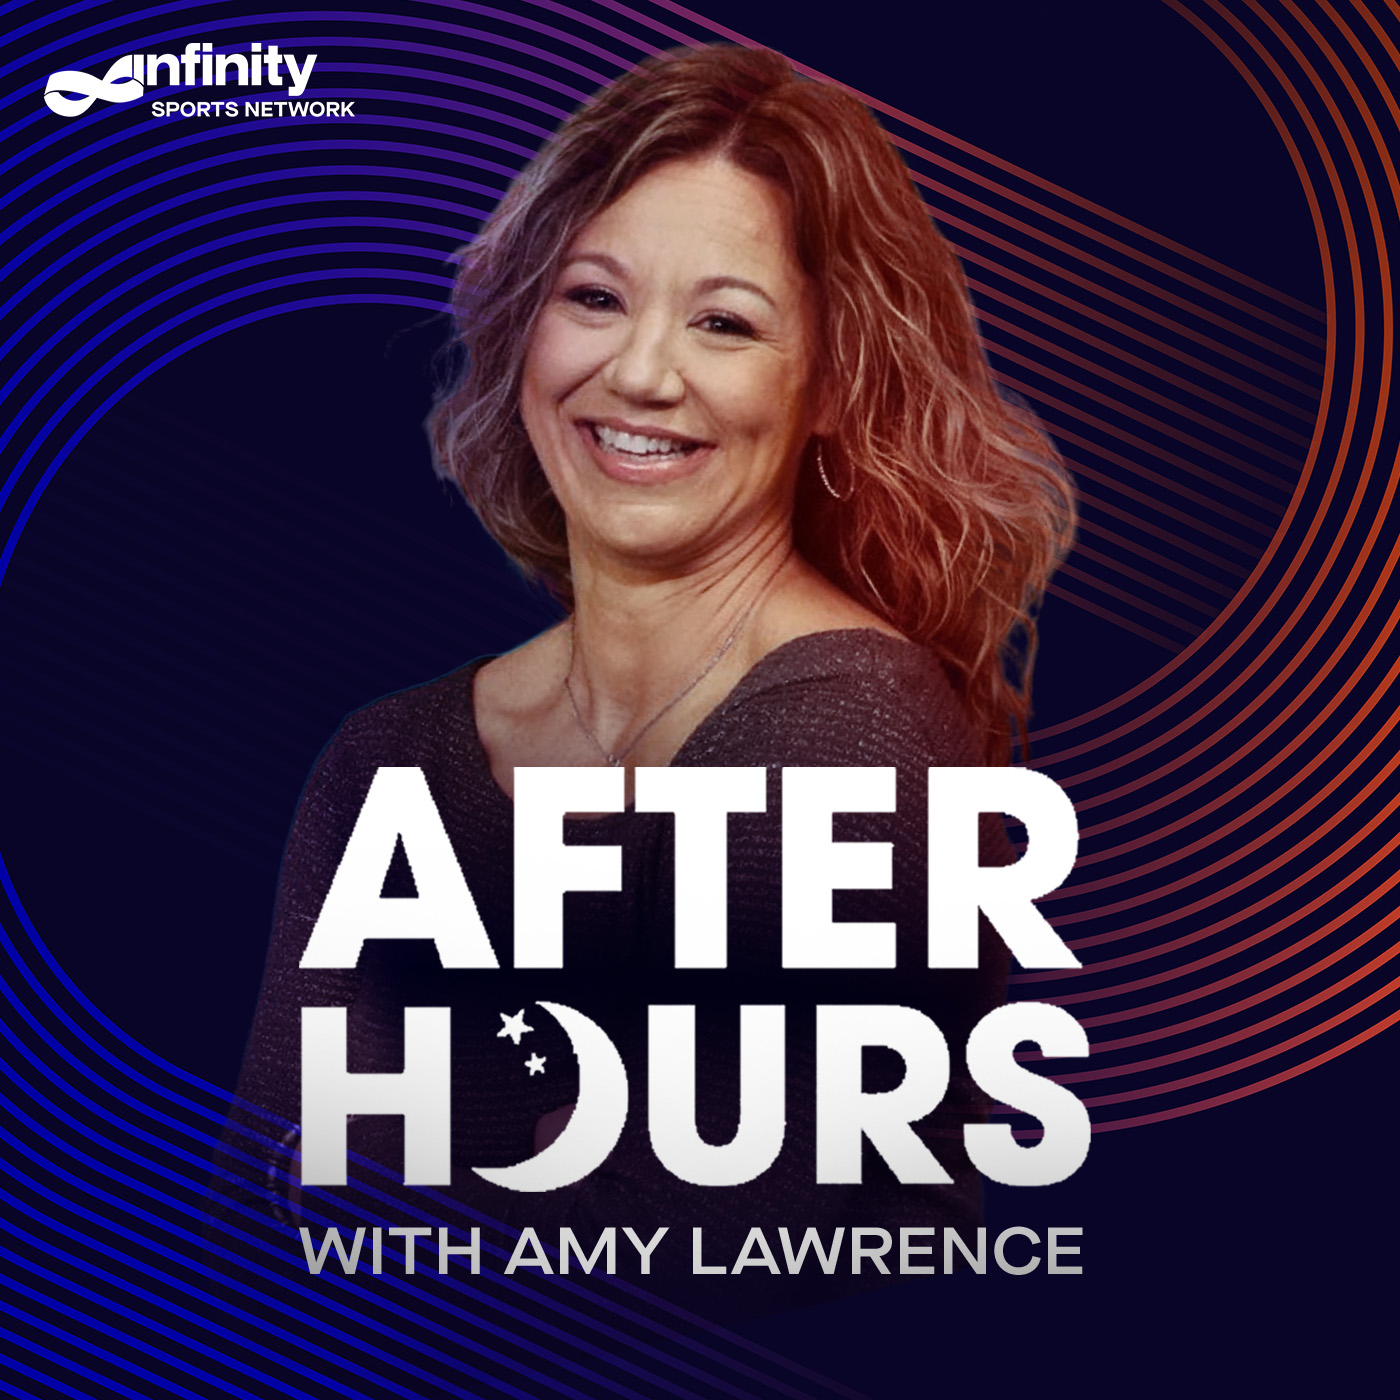 11-19-21 After Hours with Amy Lawrence PODCAST: Hour 4